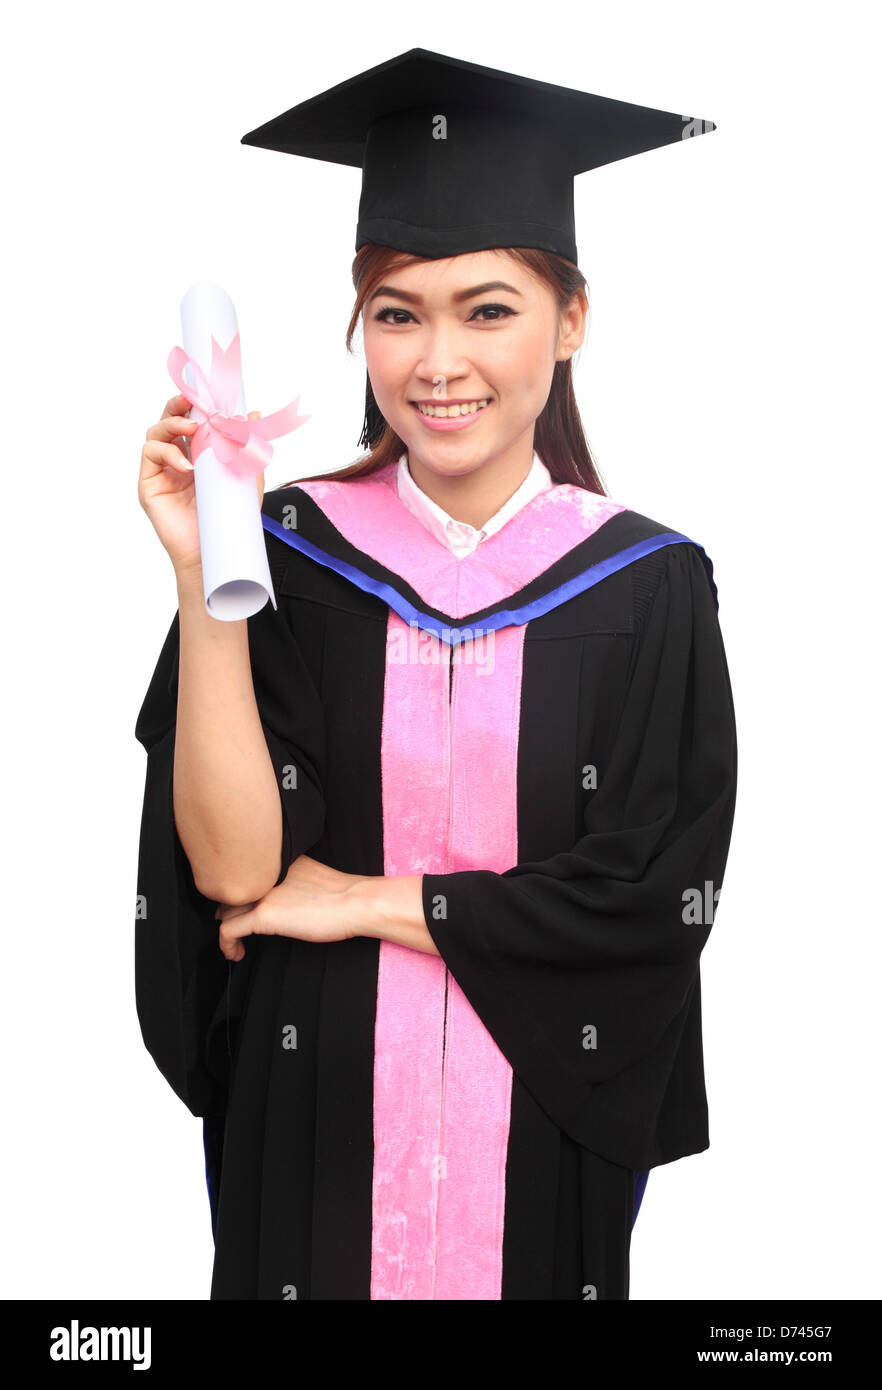 young woman with graduation cap and gown with arm raised holding diploma Stock Photo